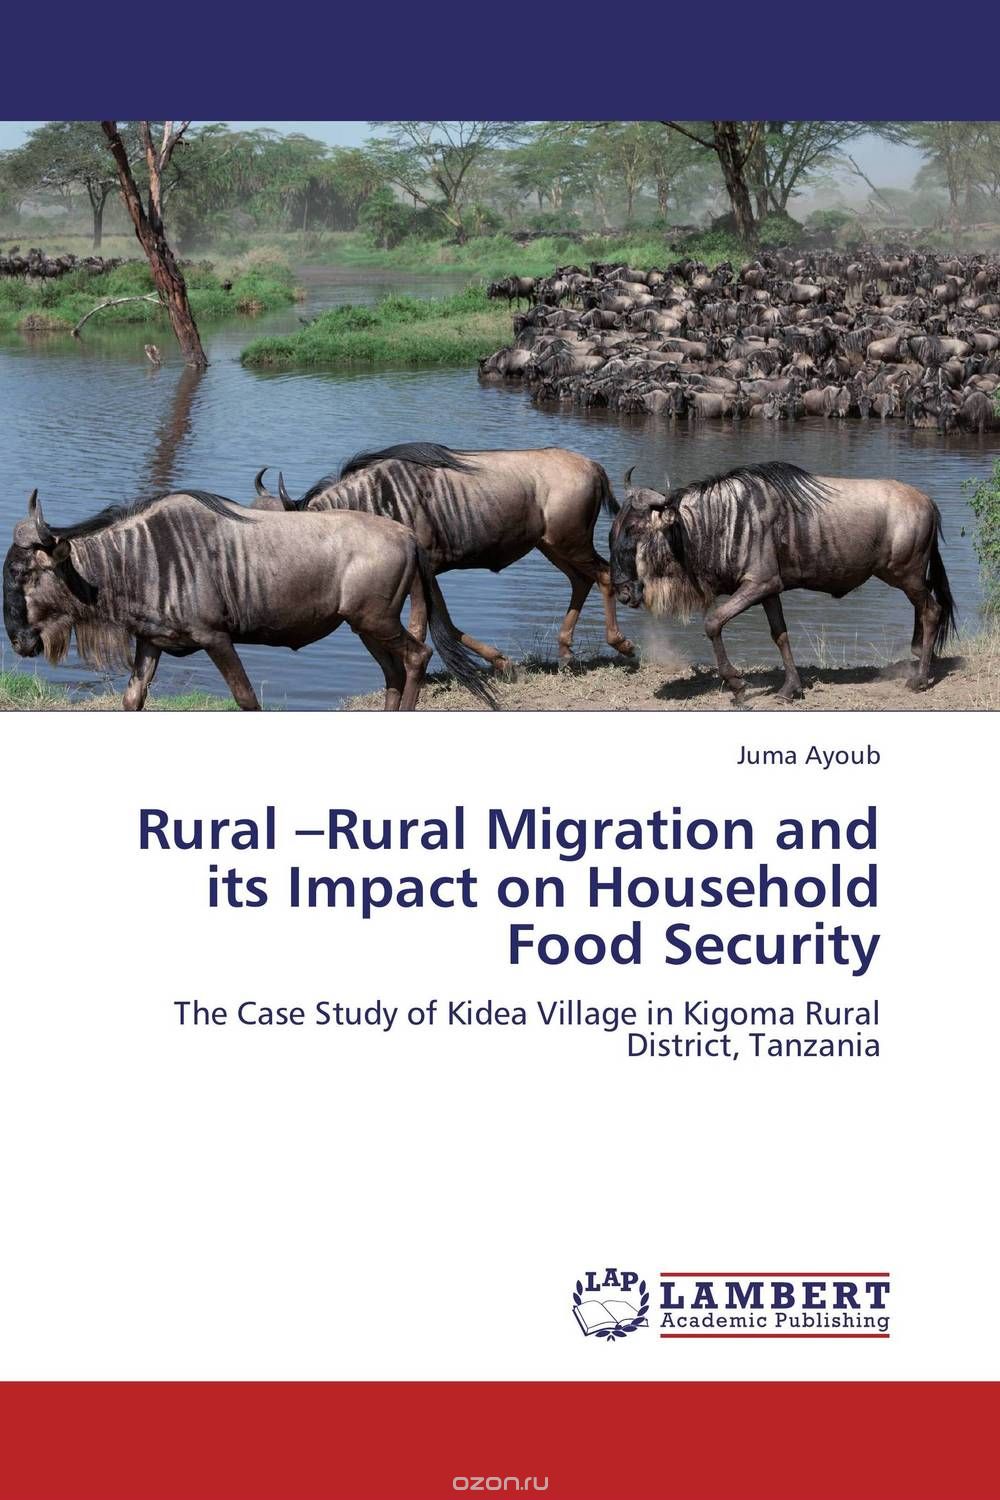 Скачать книгу "Rural –Rural Migration and its Impact on Household Food Security"